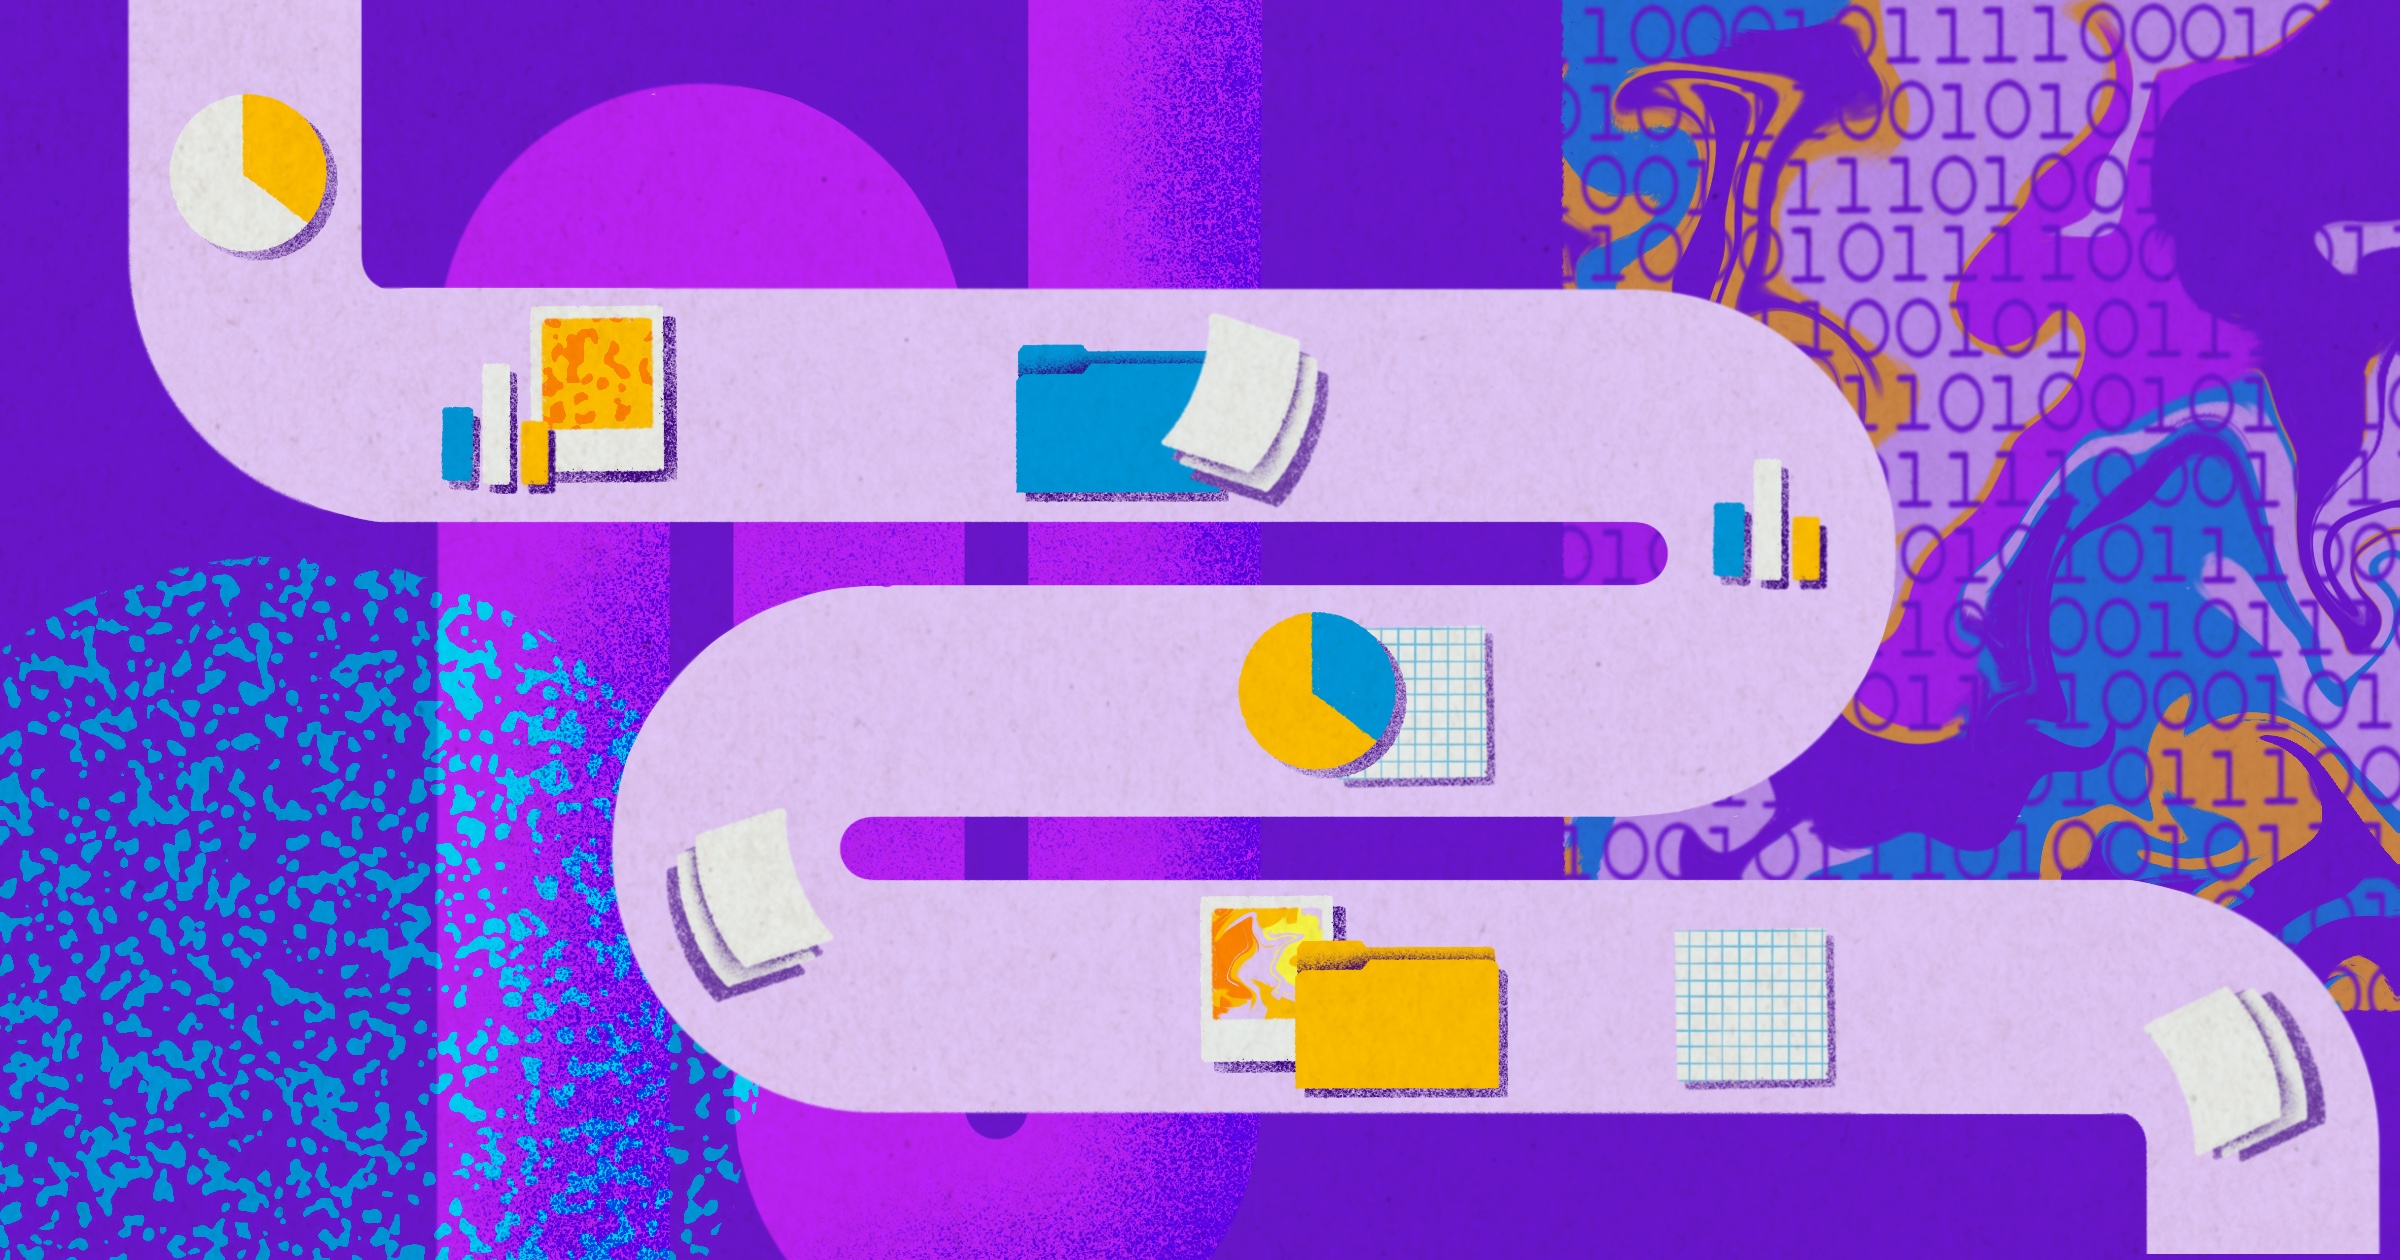 A purple graphic with yellow and blue icons of folders, data, charts, and clouds.